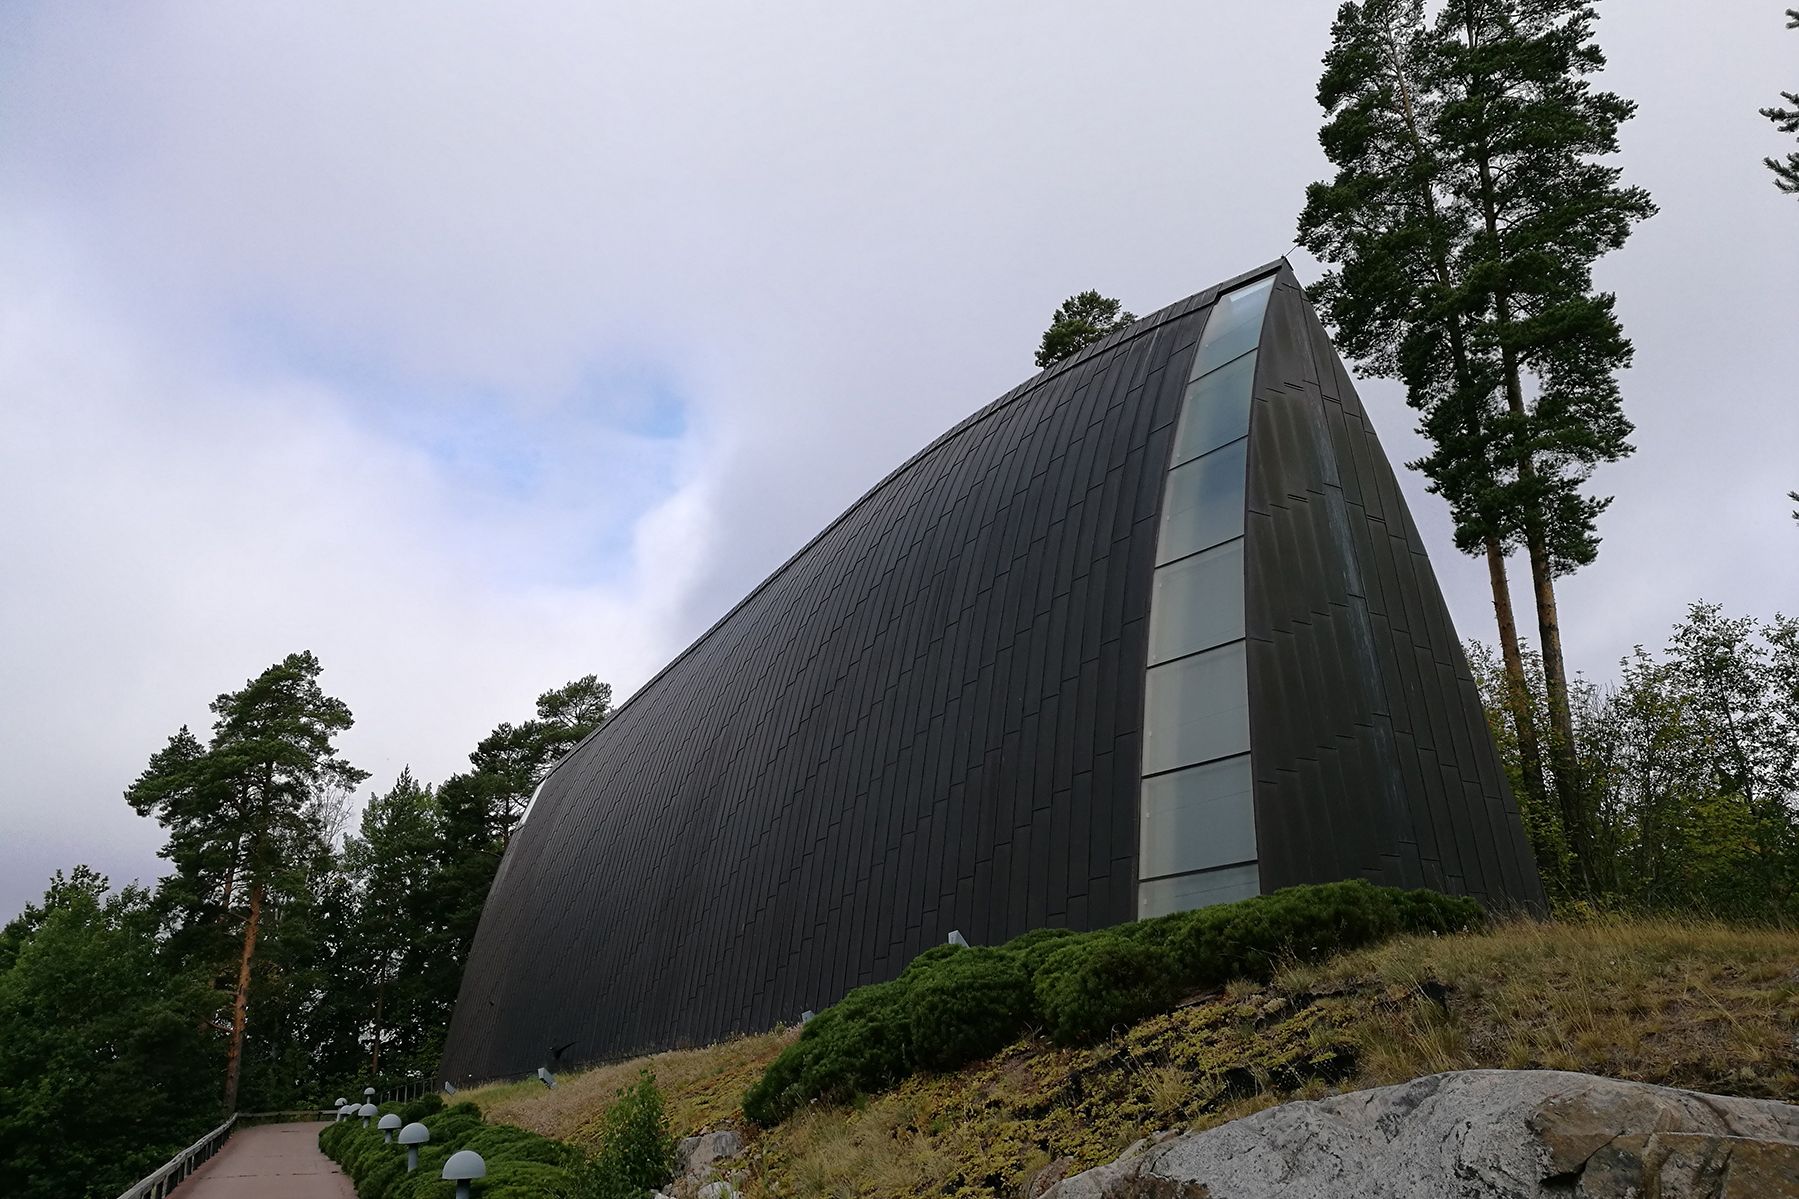 An external view of the Art Chapel, which looks like an upturned boat.